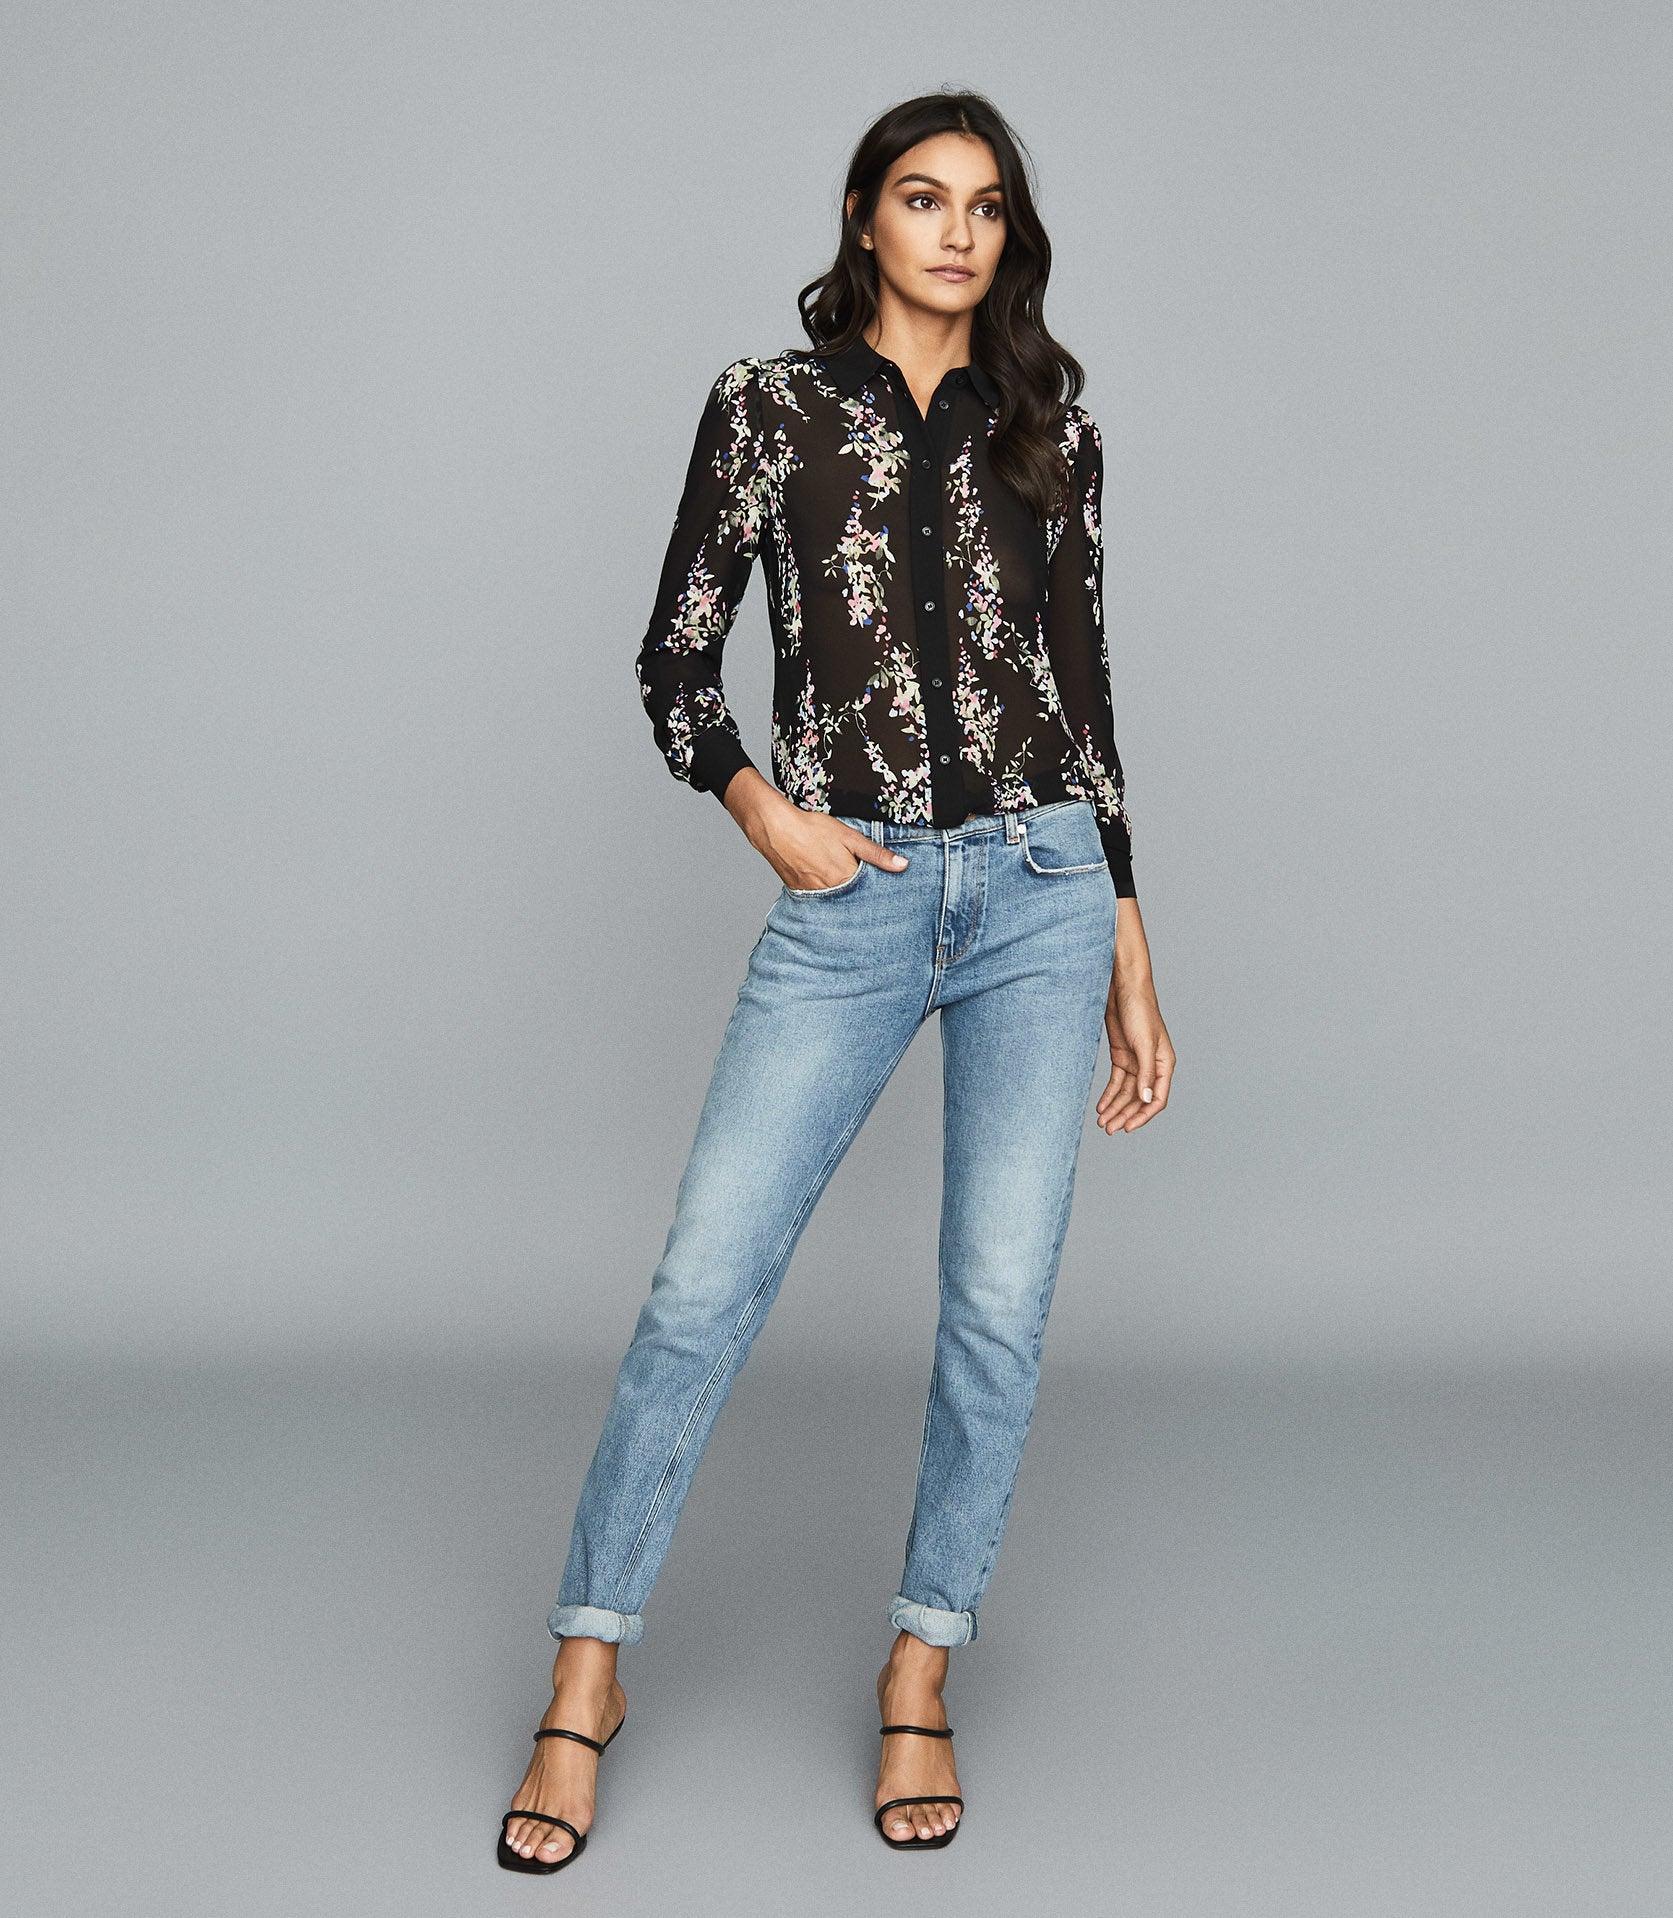 Reiss Synthetic Priscilla - Floral Printed Blouse in Black - Lyst